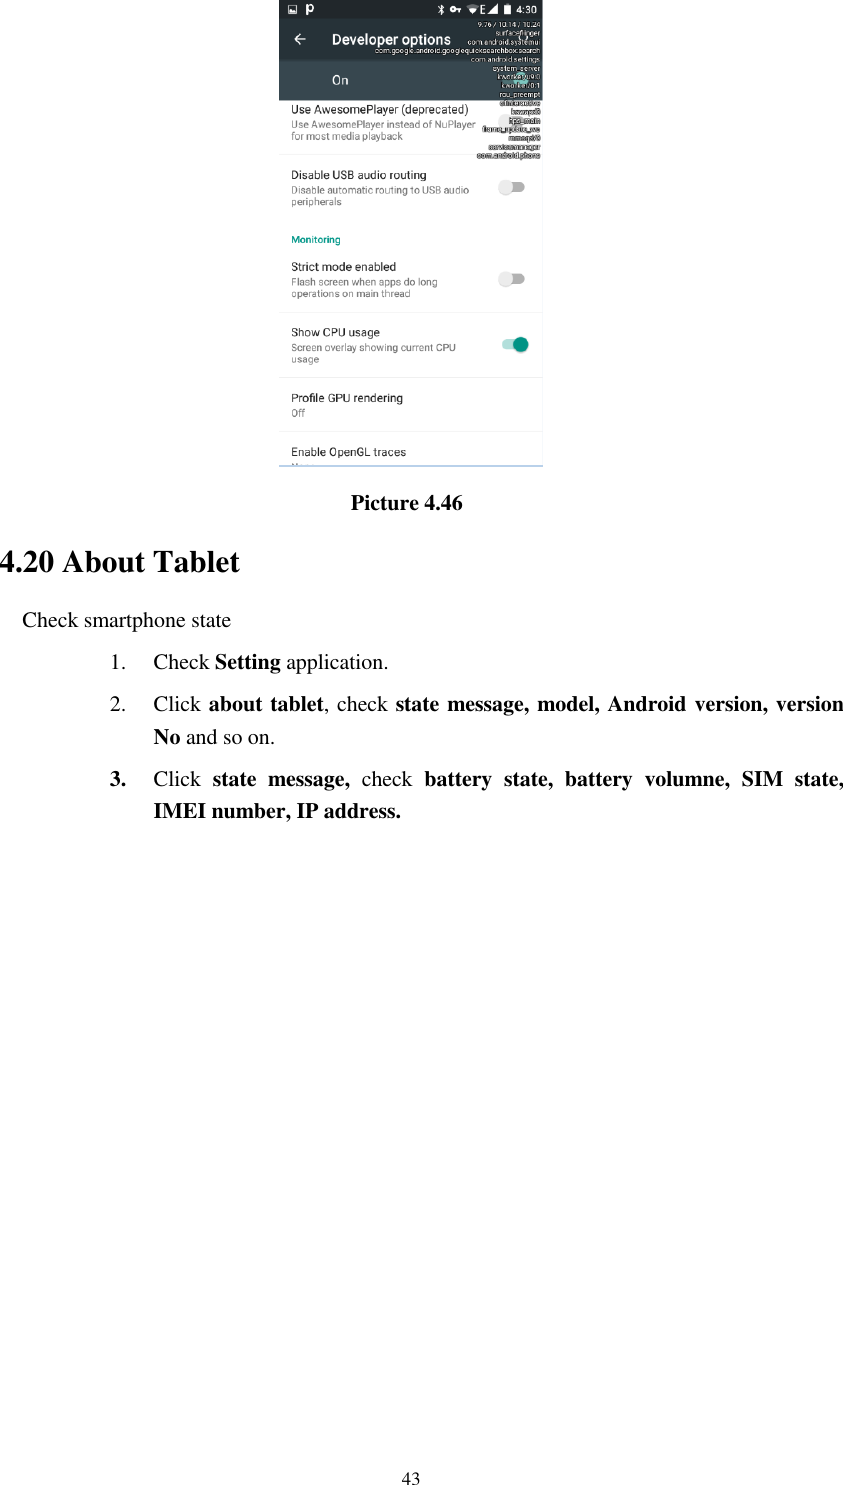      43                                    Picture 4.46 4.20 About Tablet Check smartphone state 1. Check Setting application. 2. Click about tablet, check state message, model, Android version, version No and so on. 3. Click  state  message,  check  battery  state,  battery  volumne,  SIM  state, IMEI number, IP address.          